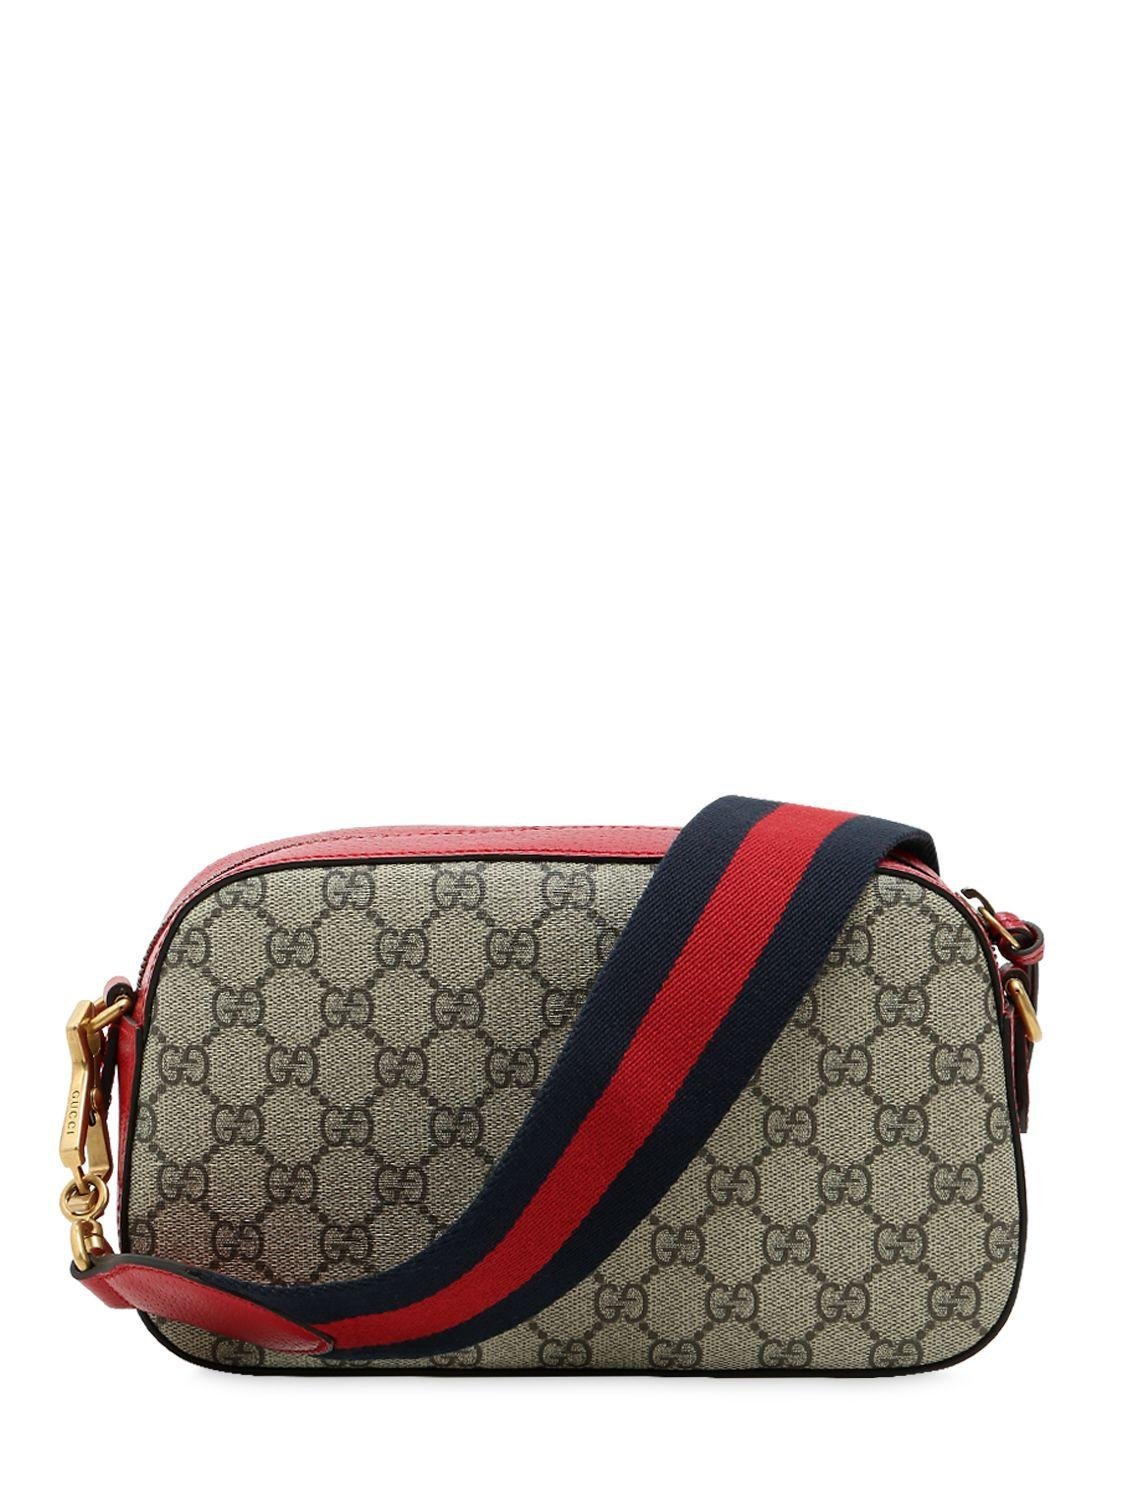 Gucci Neo Vintage Doctors Bag in Red